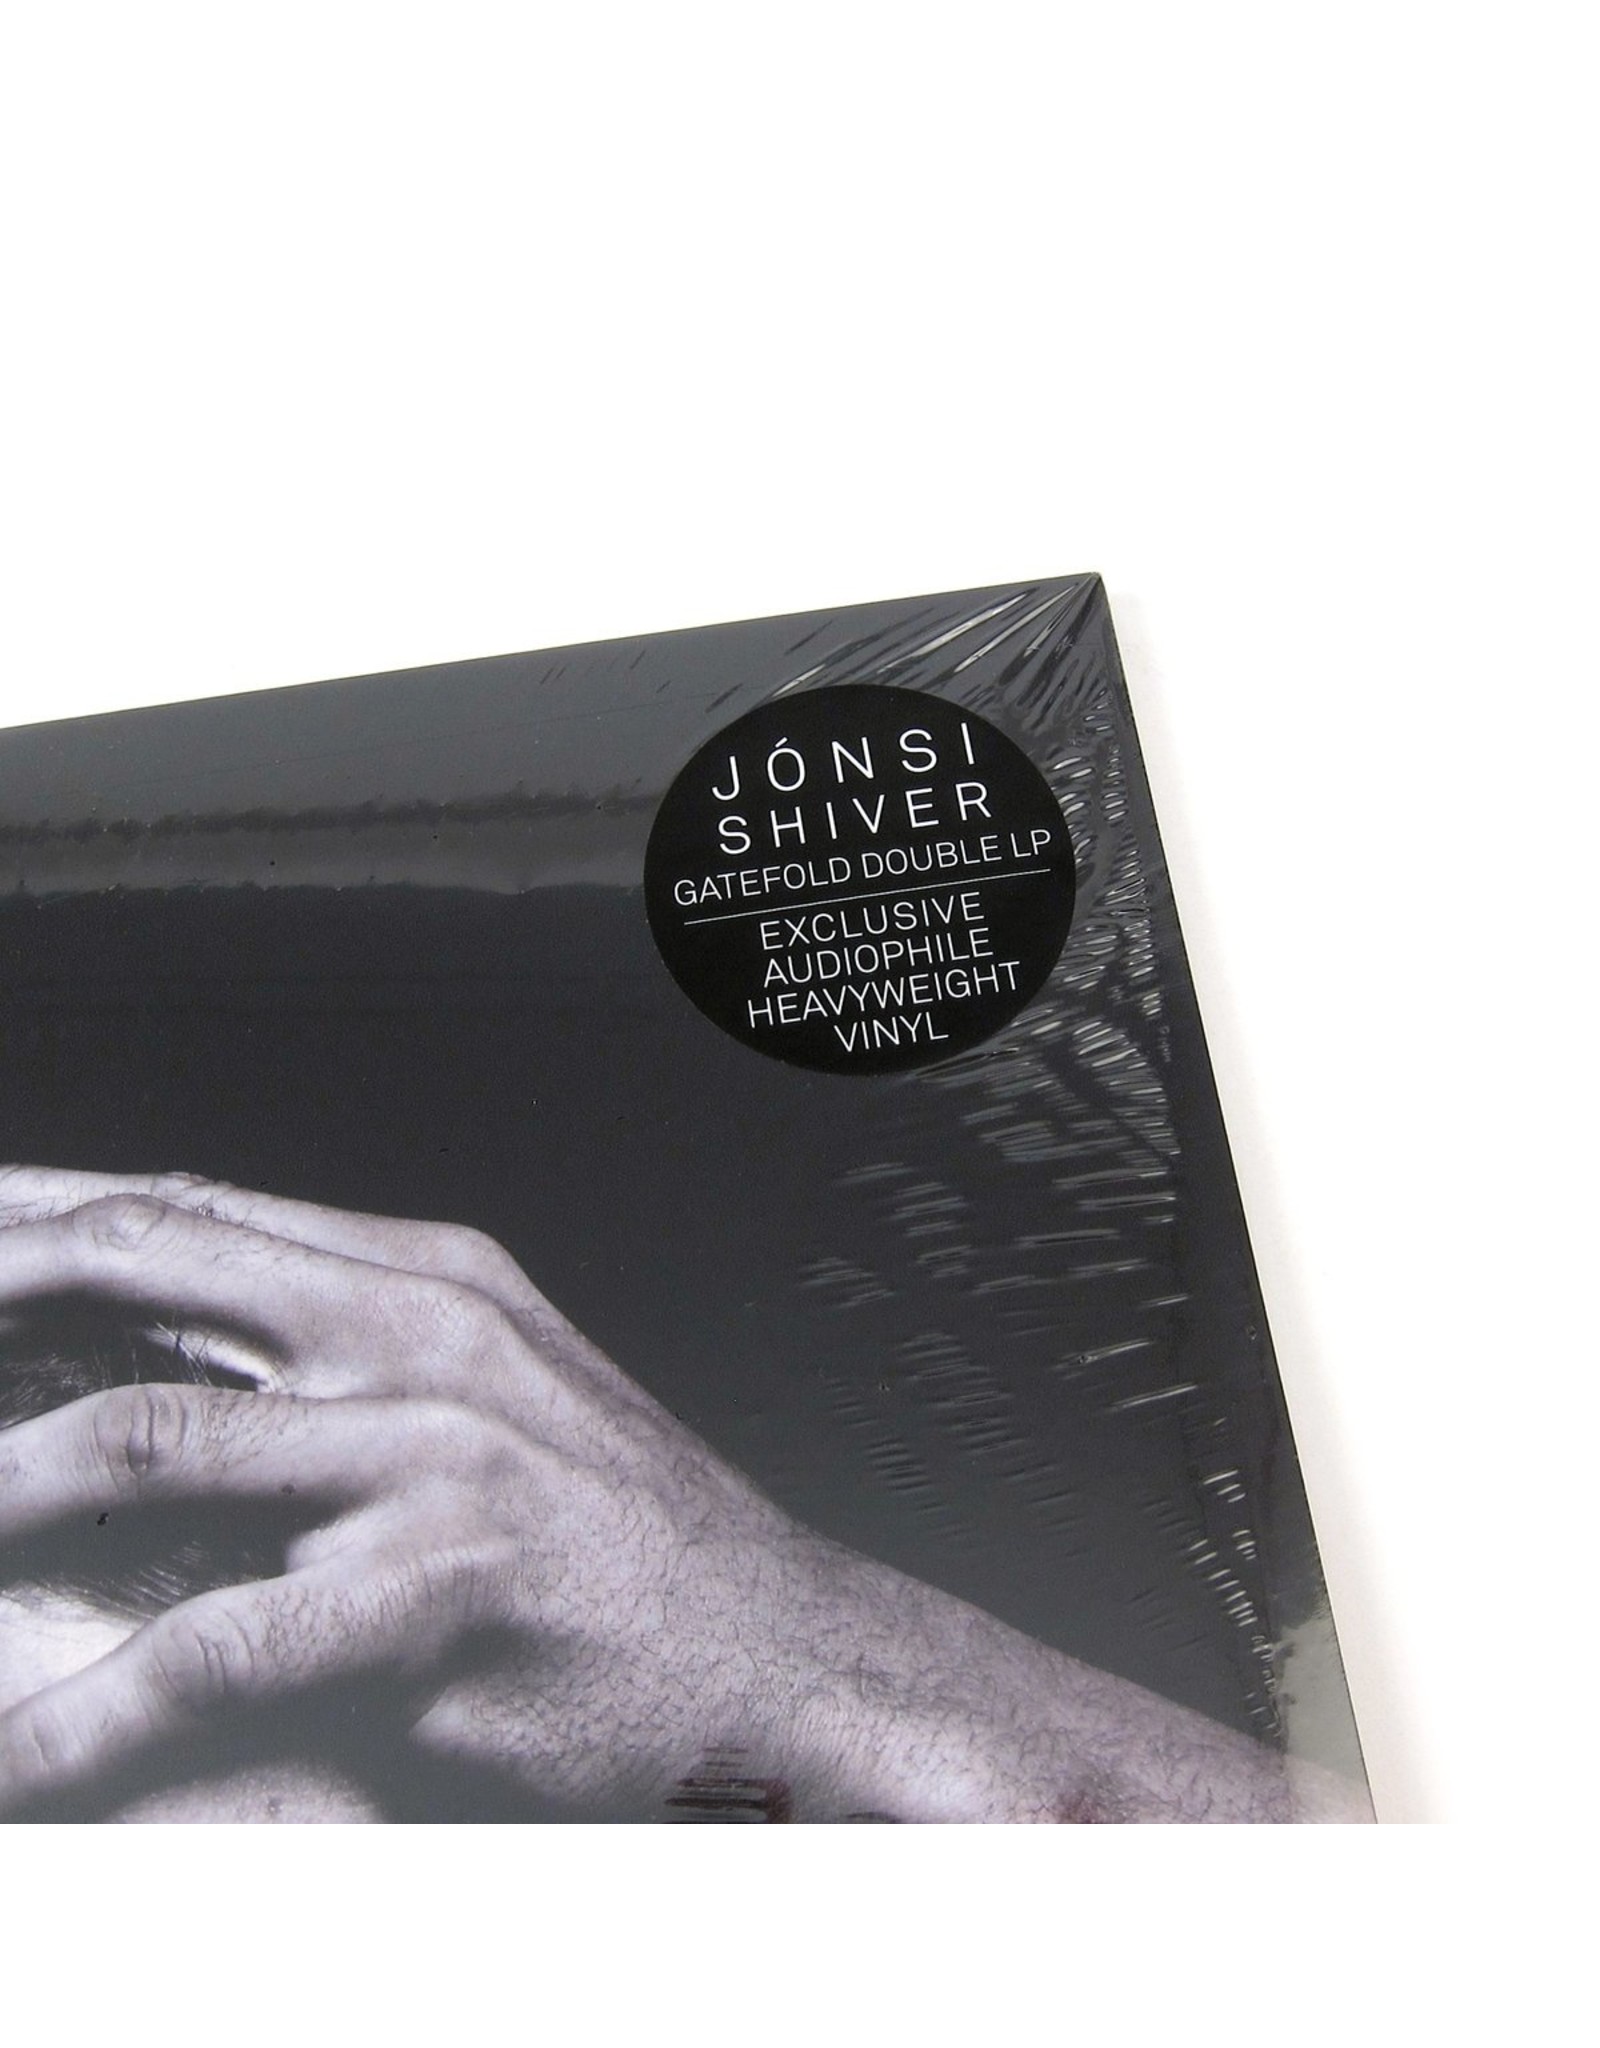 Jonsi - Shiver (Exclusive Audiophile Edition)